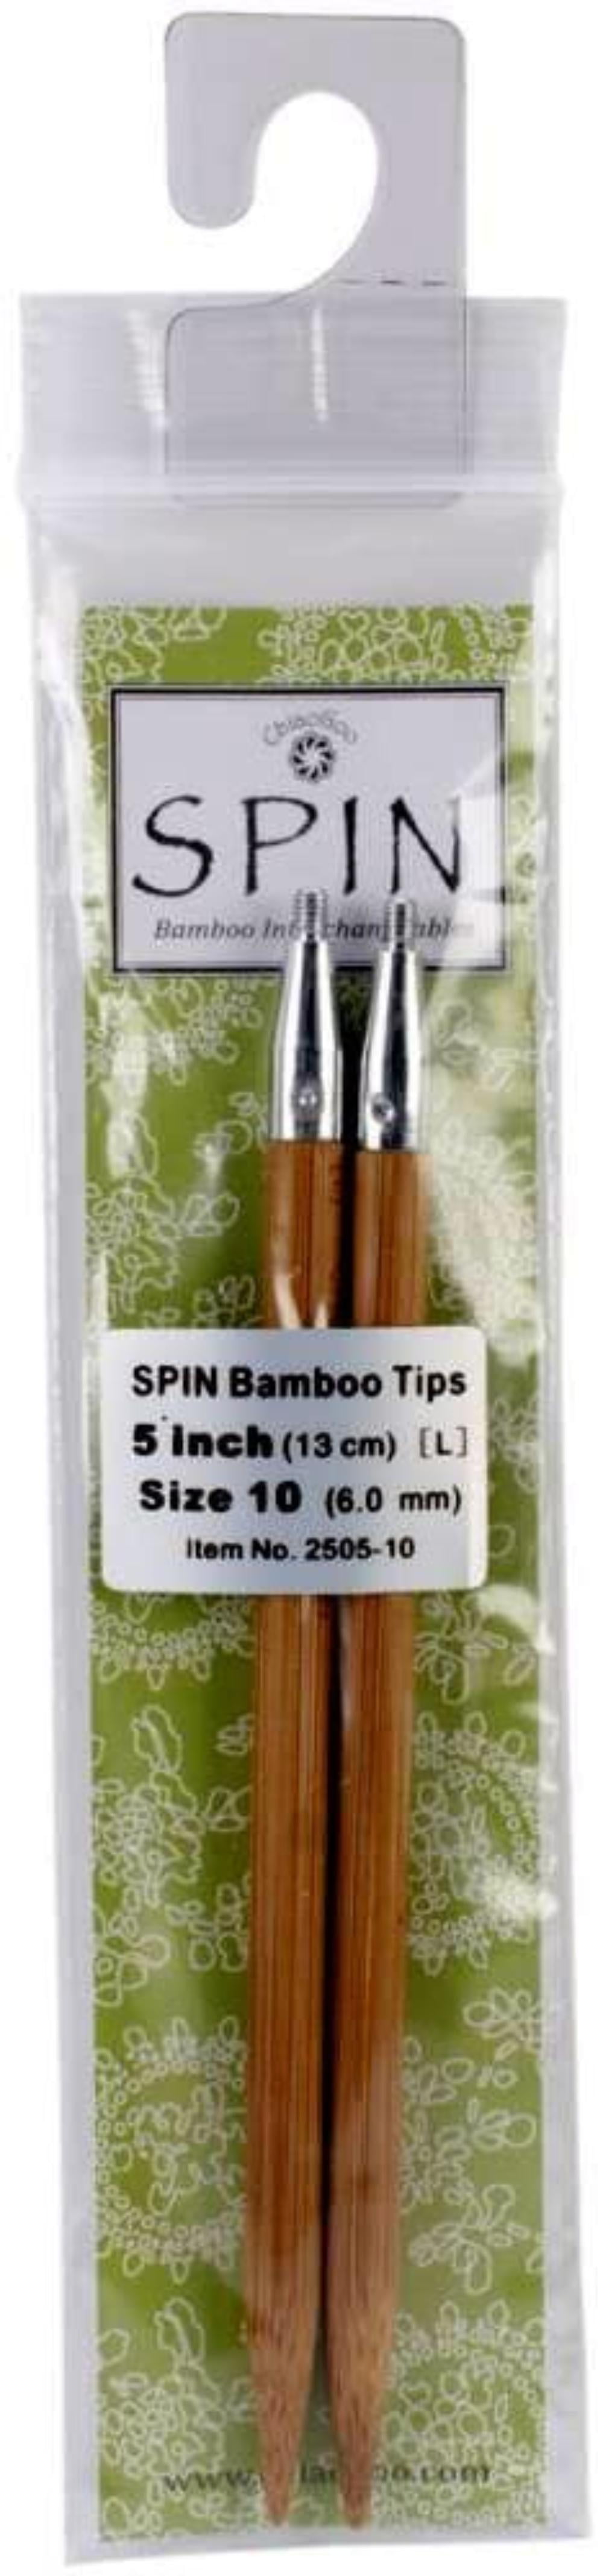 for Spin Interchangeable Set Size US 2.5 13cm ChiaoGoo Needle Tips 5in 3mm 